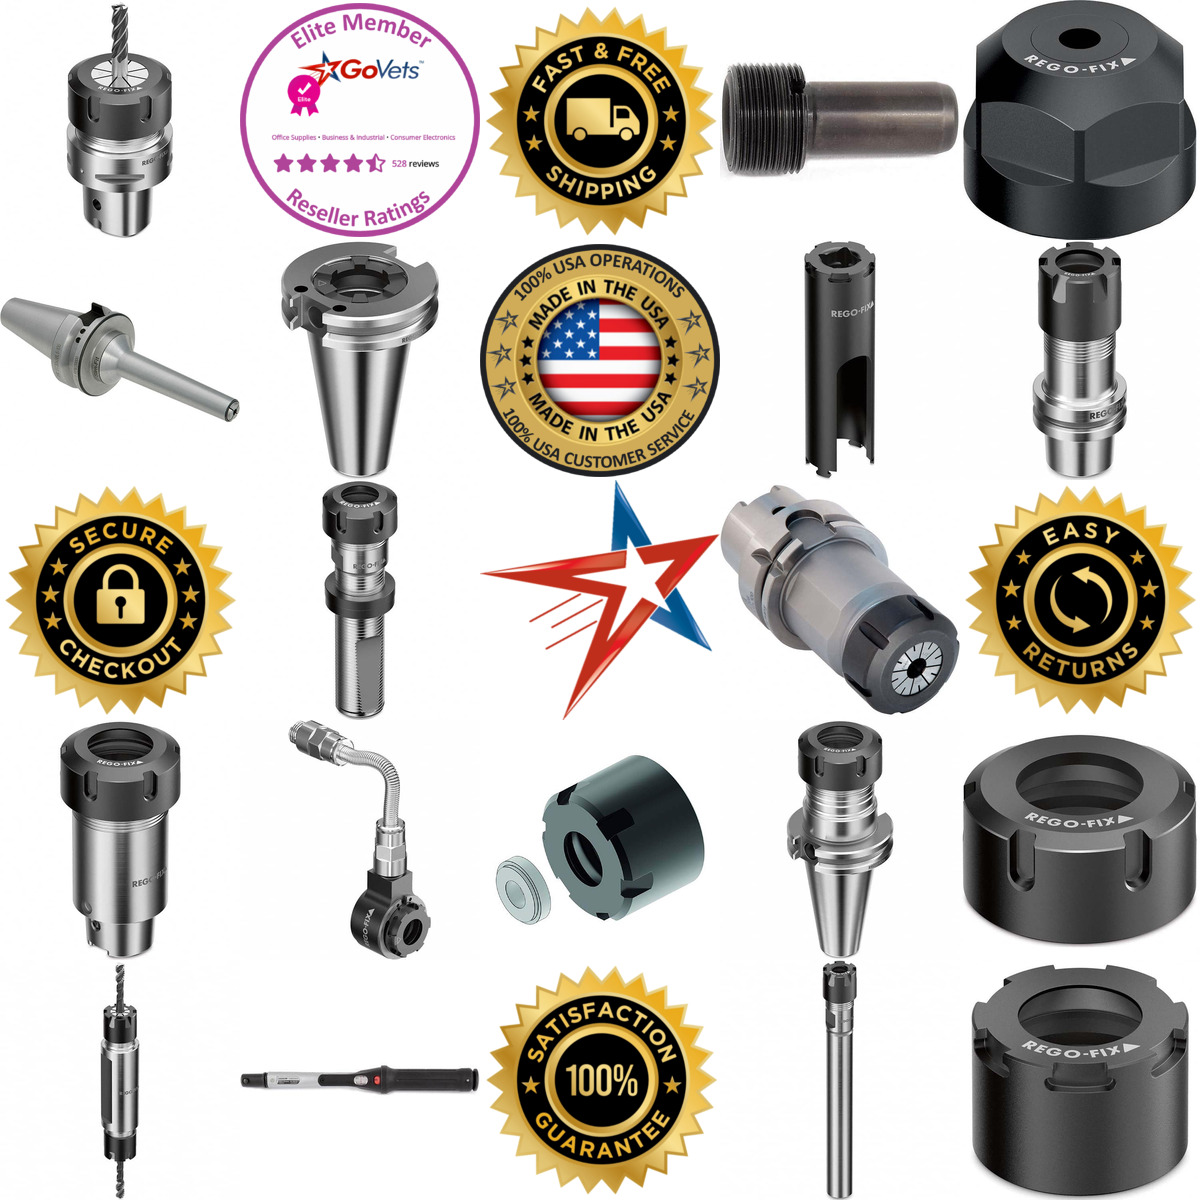 A selection of Collet Coolant Seals products on GoVets